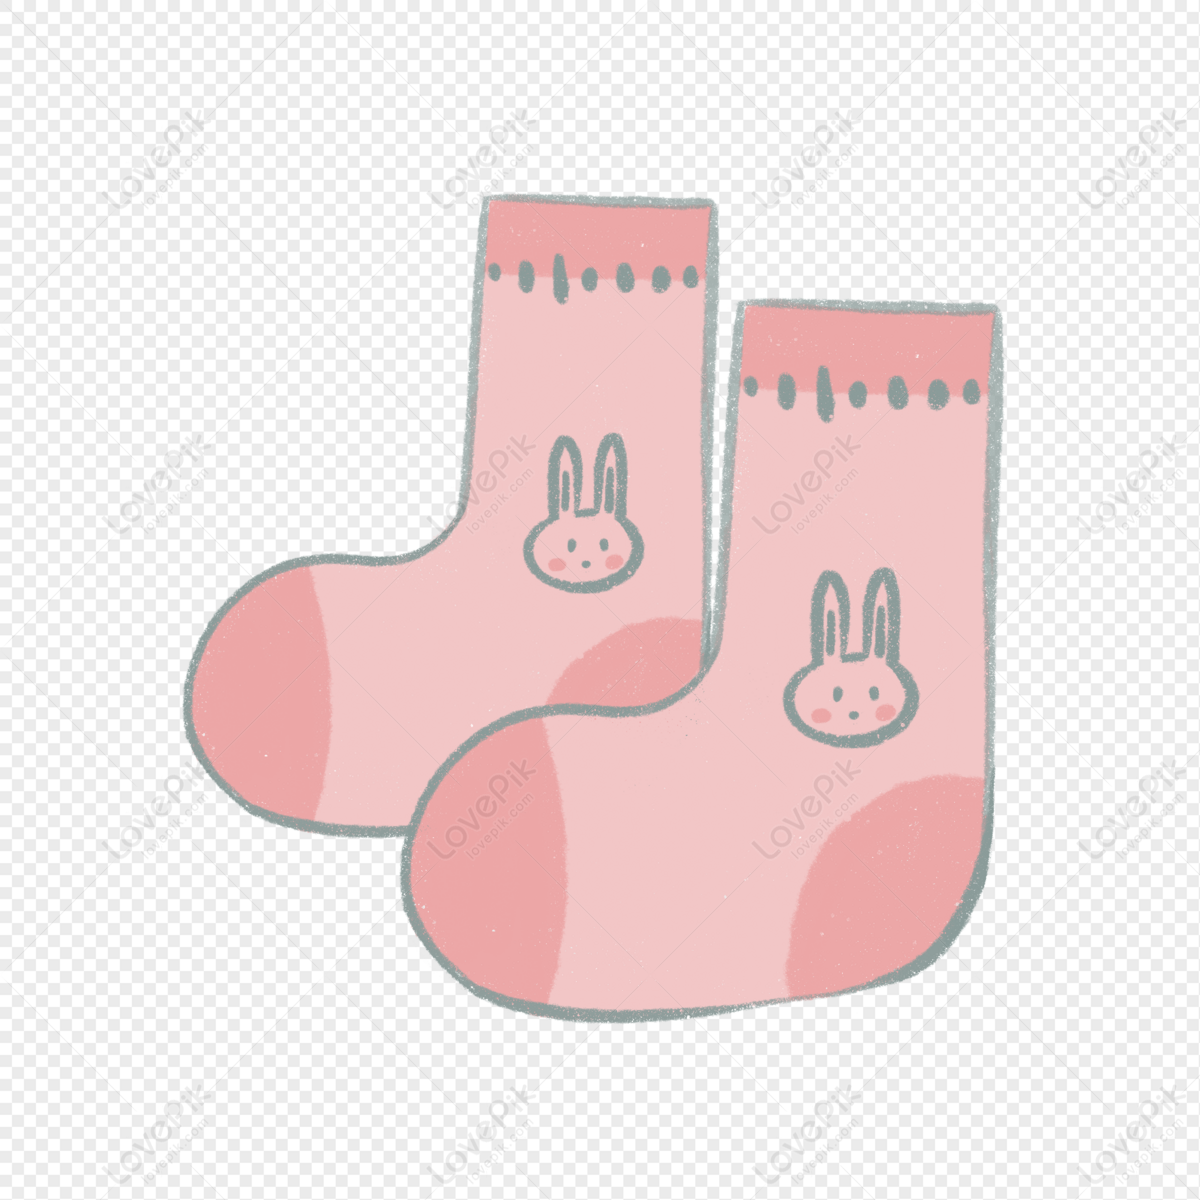 Sock PNG Free Download And Clipart Image For Free Download - Lovepik ...